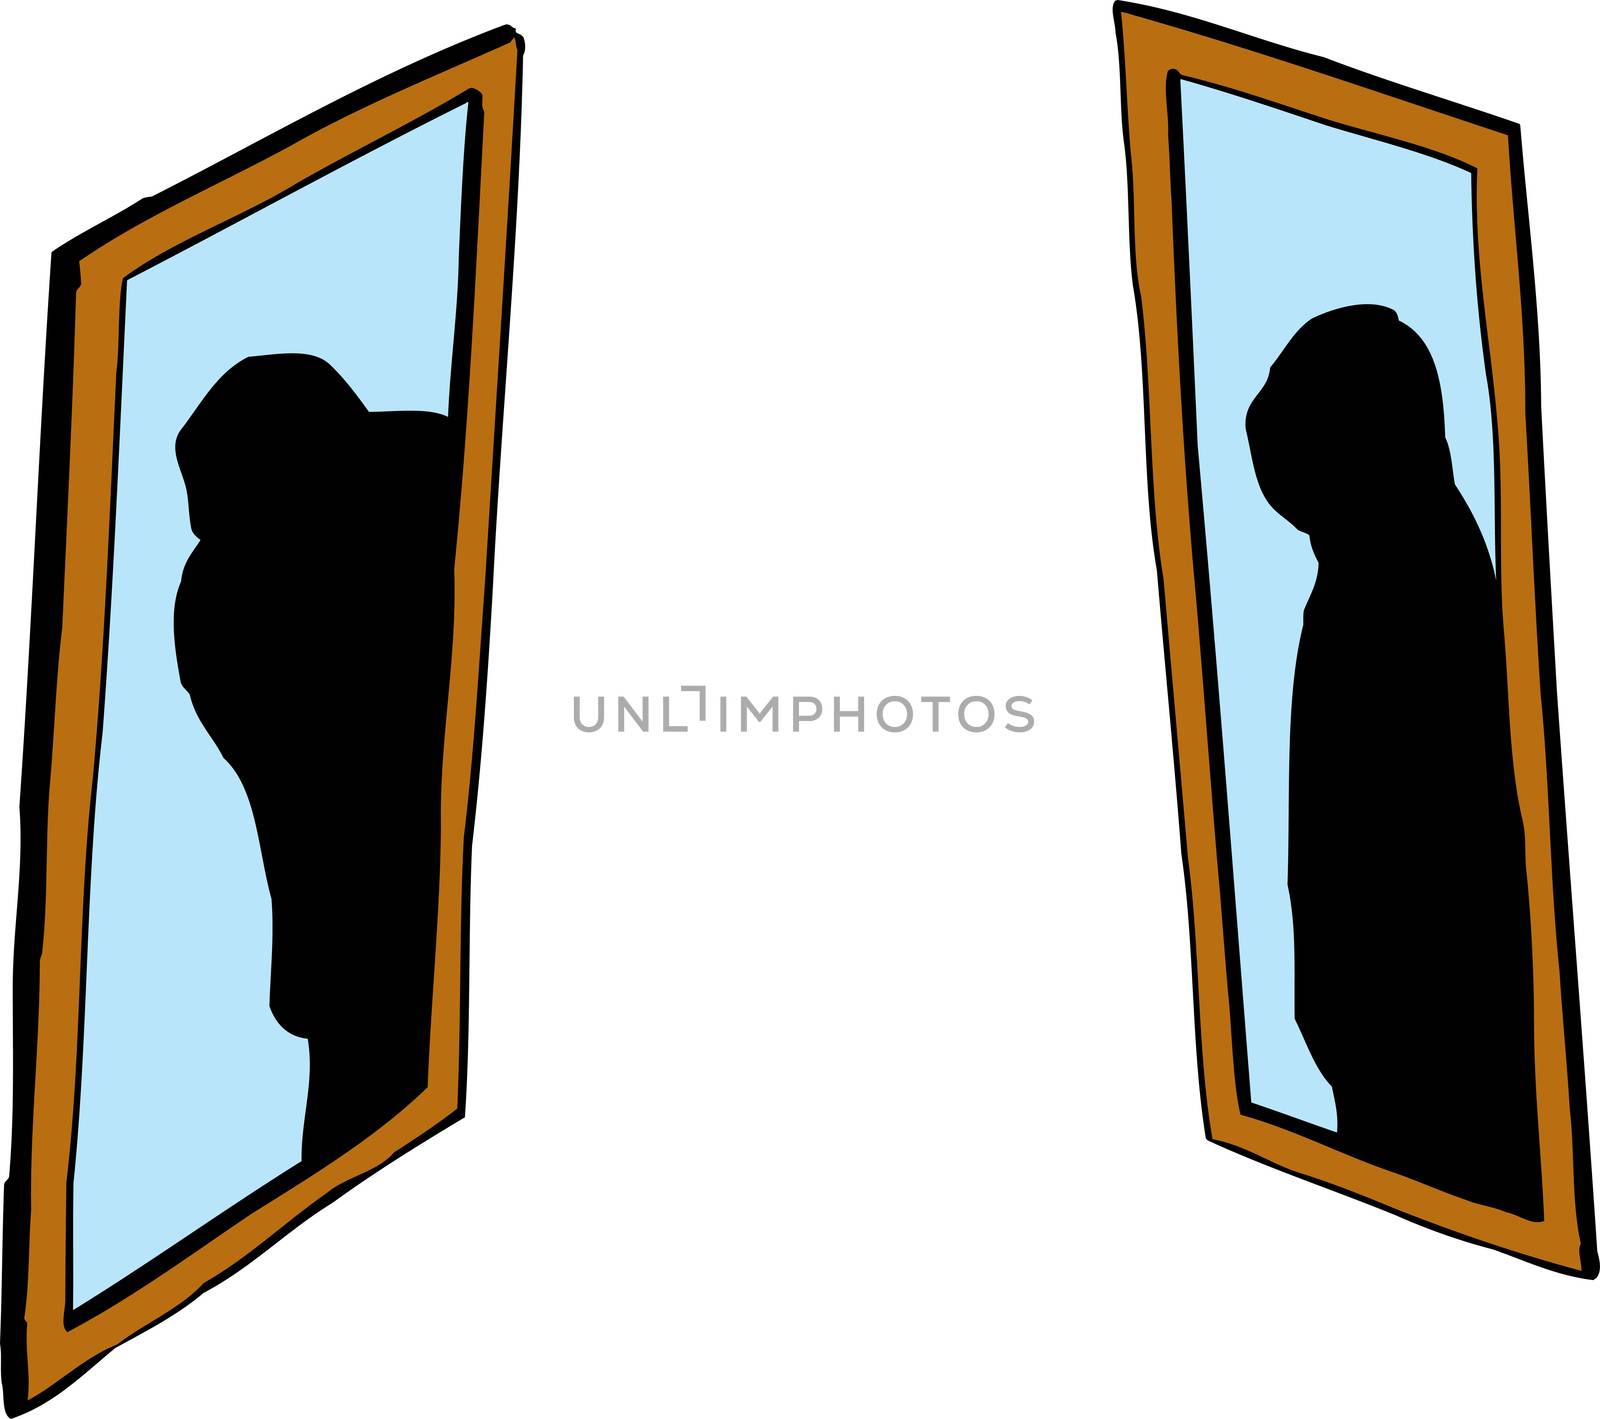 Shadowy figure in mirrors by TheBlackRhino